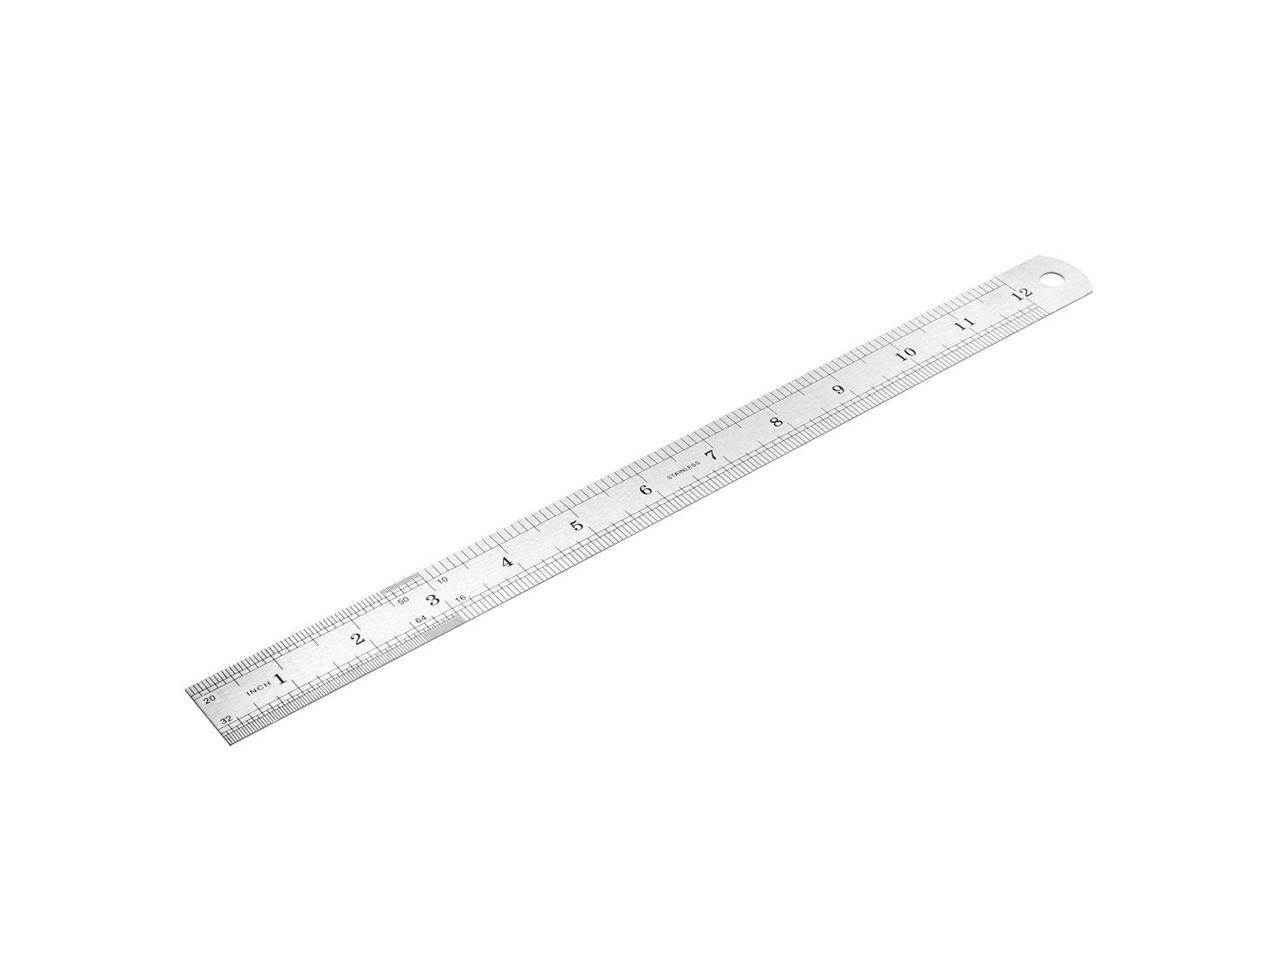 uxcell Geometric Drawing Template Measuring Ruler Plastic 23cm for Drawing Engineering Drafting Building Office Supplies 